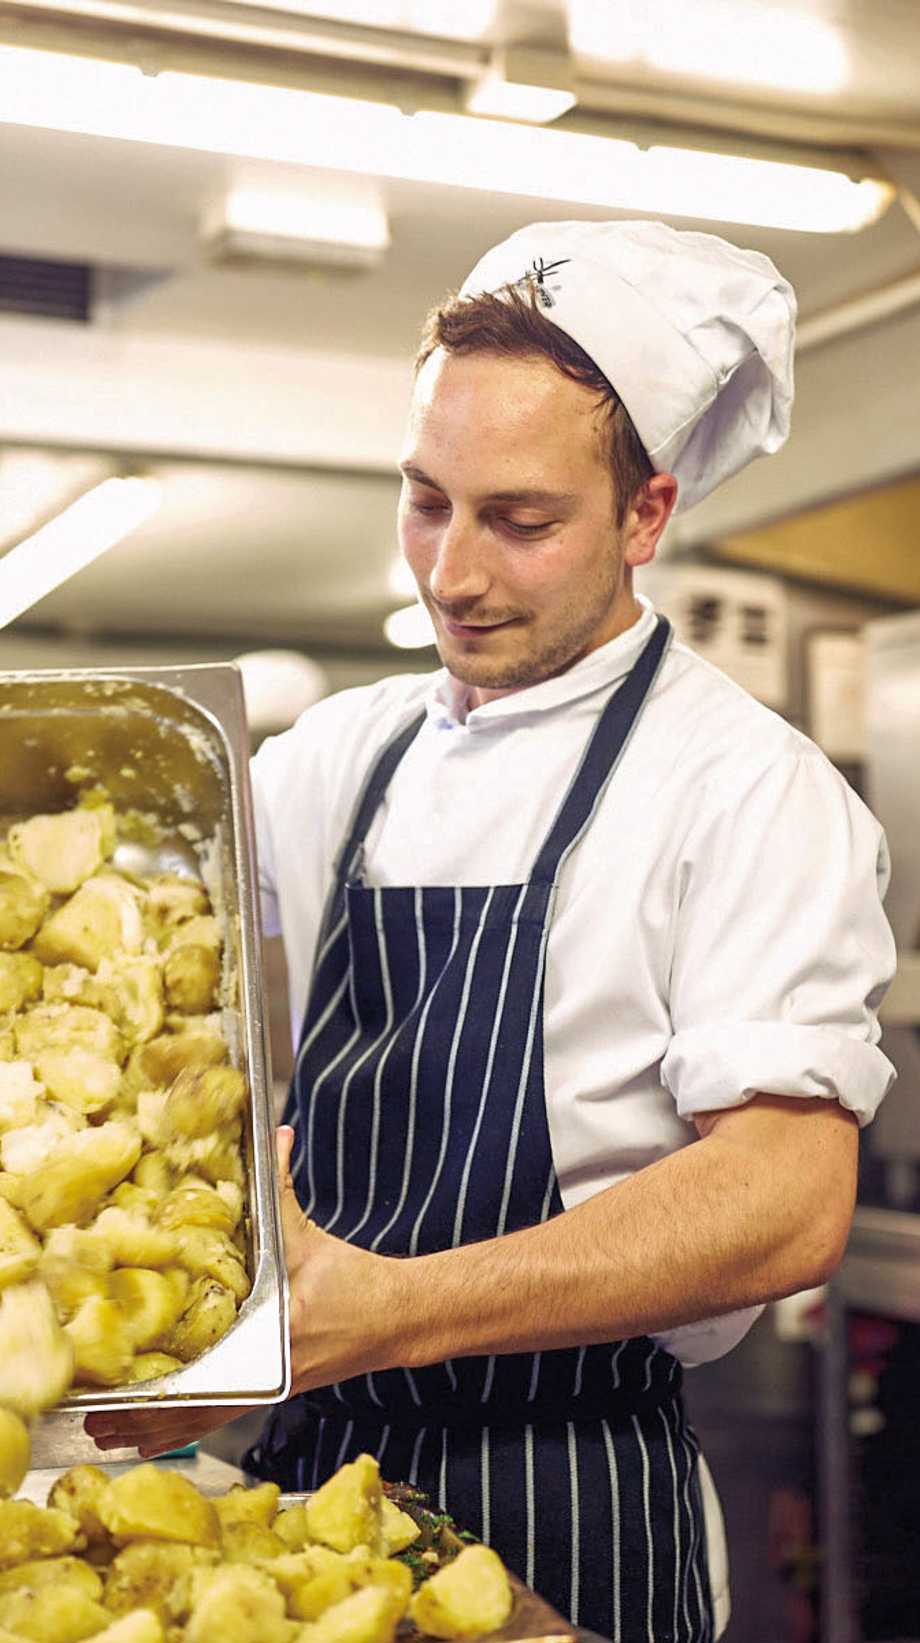 A chef with an apron and white hat pours a tub of roast potatoes into another tub.